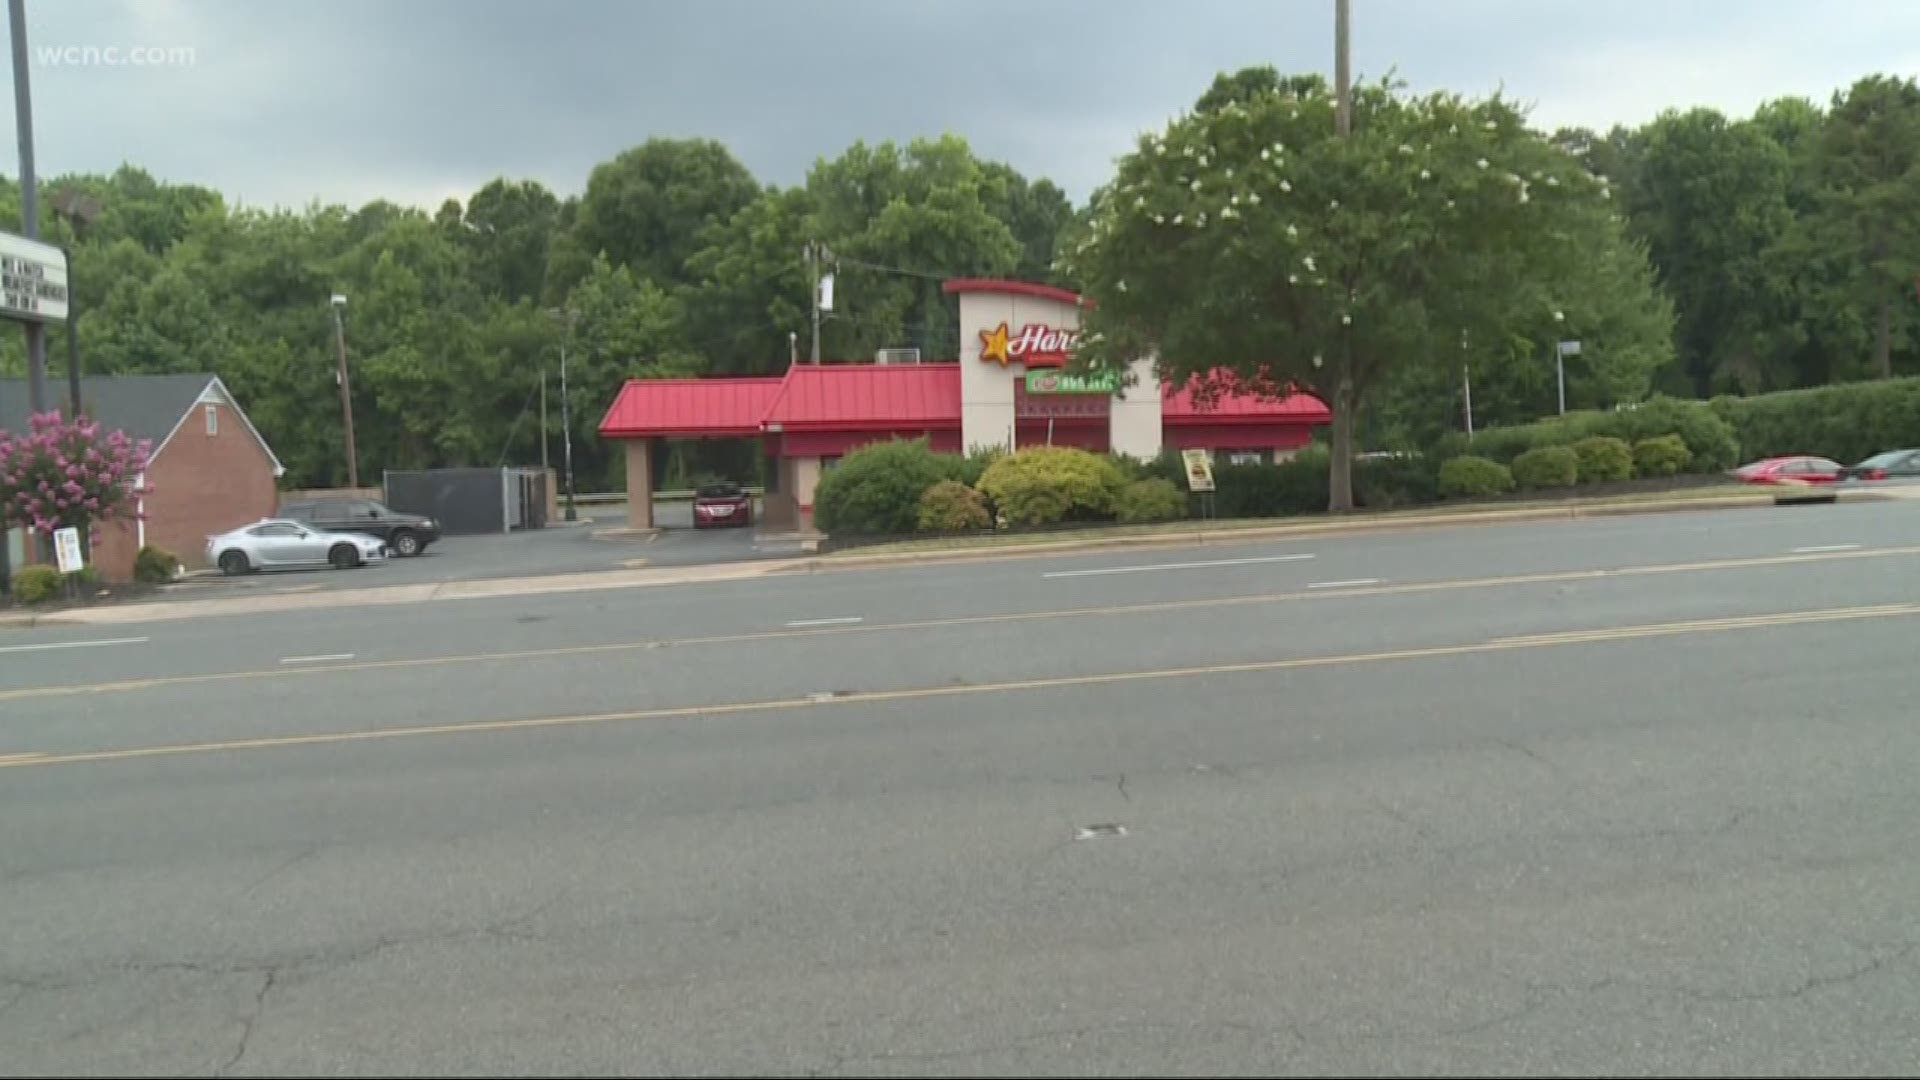 A second class action lawsuit has been filed against the west Charlotte Hardee's and its parent company Morning Star.